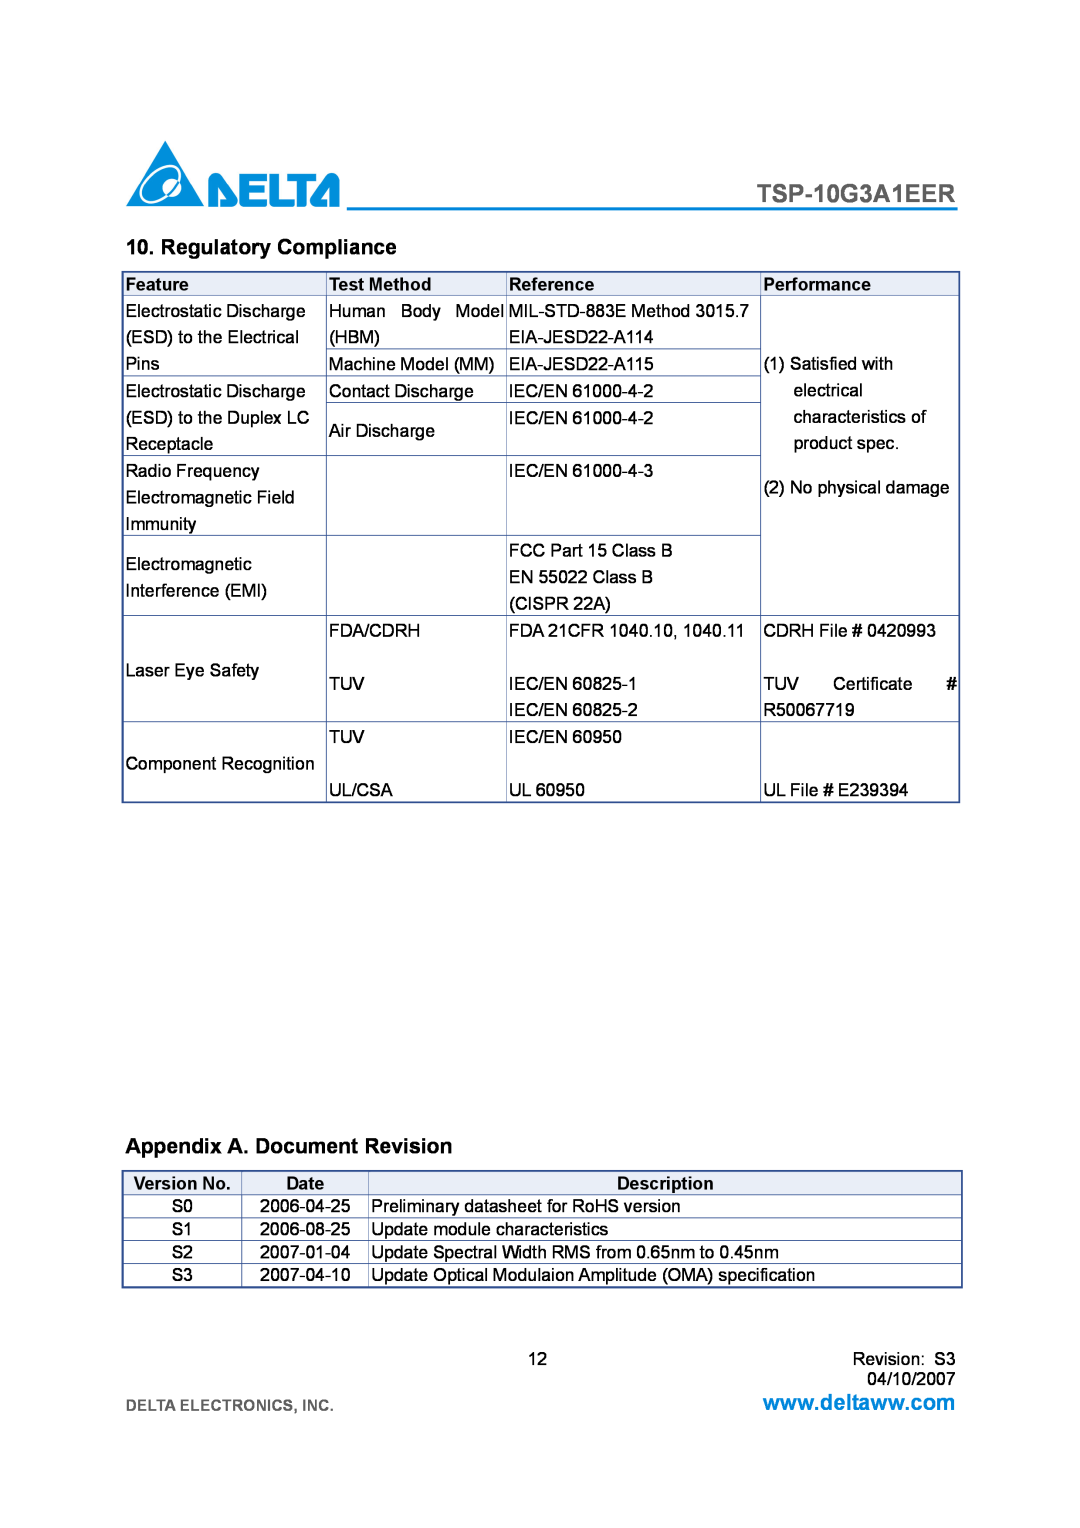 Delta Electronics TSP-10G3A1EER Regulatory Compliance, Appendix A. Document Revision, Feature, Test Method, Reference 